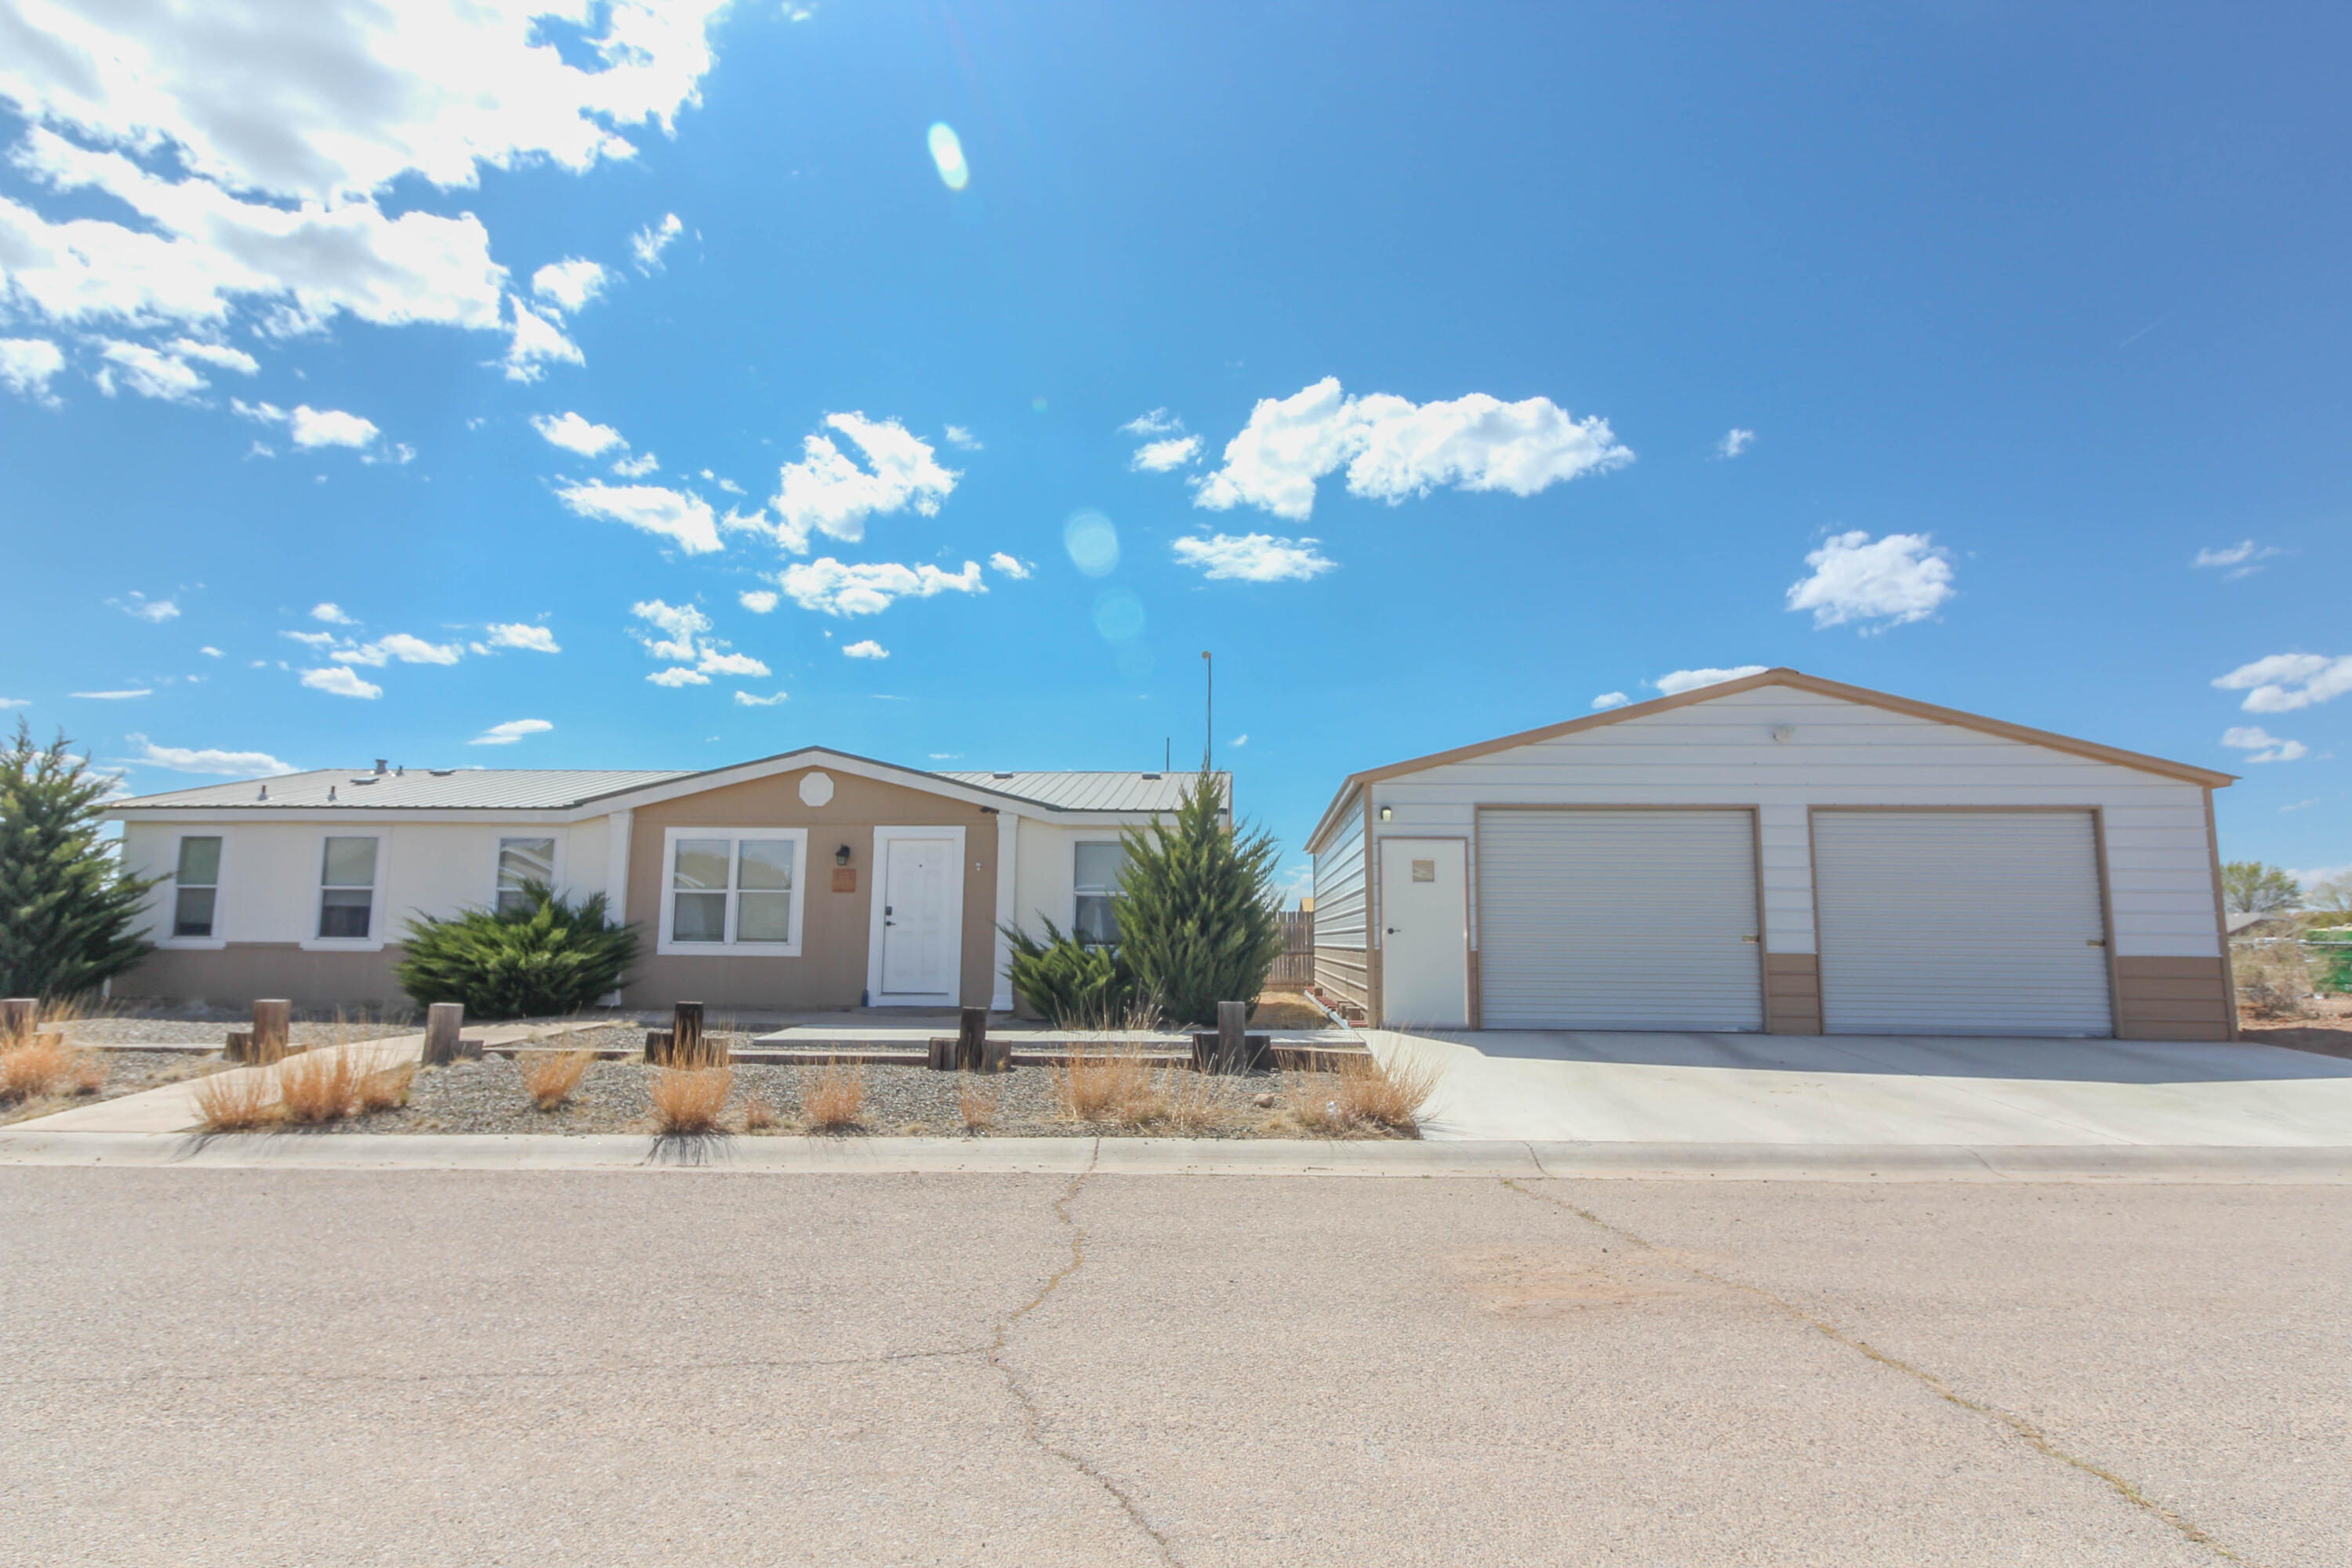 509 Camino Andres, Moriarty, New Mexico 87035, 3 Bedrooms Bedrooms, ,2 BathroomsBathrooms,Residential,For Sale,509 Camino Andres,1061234